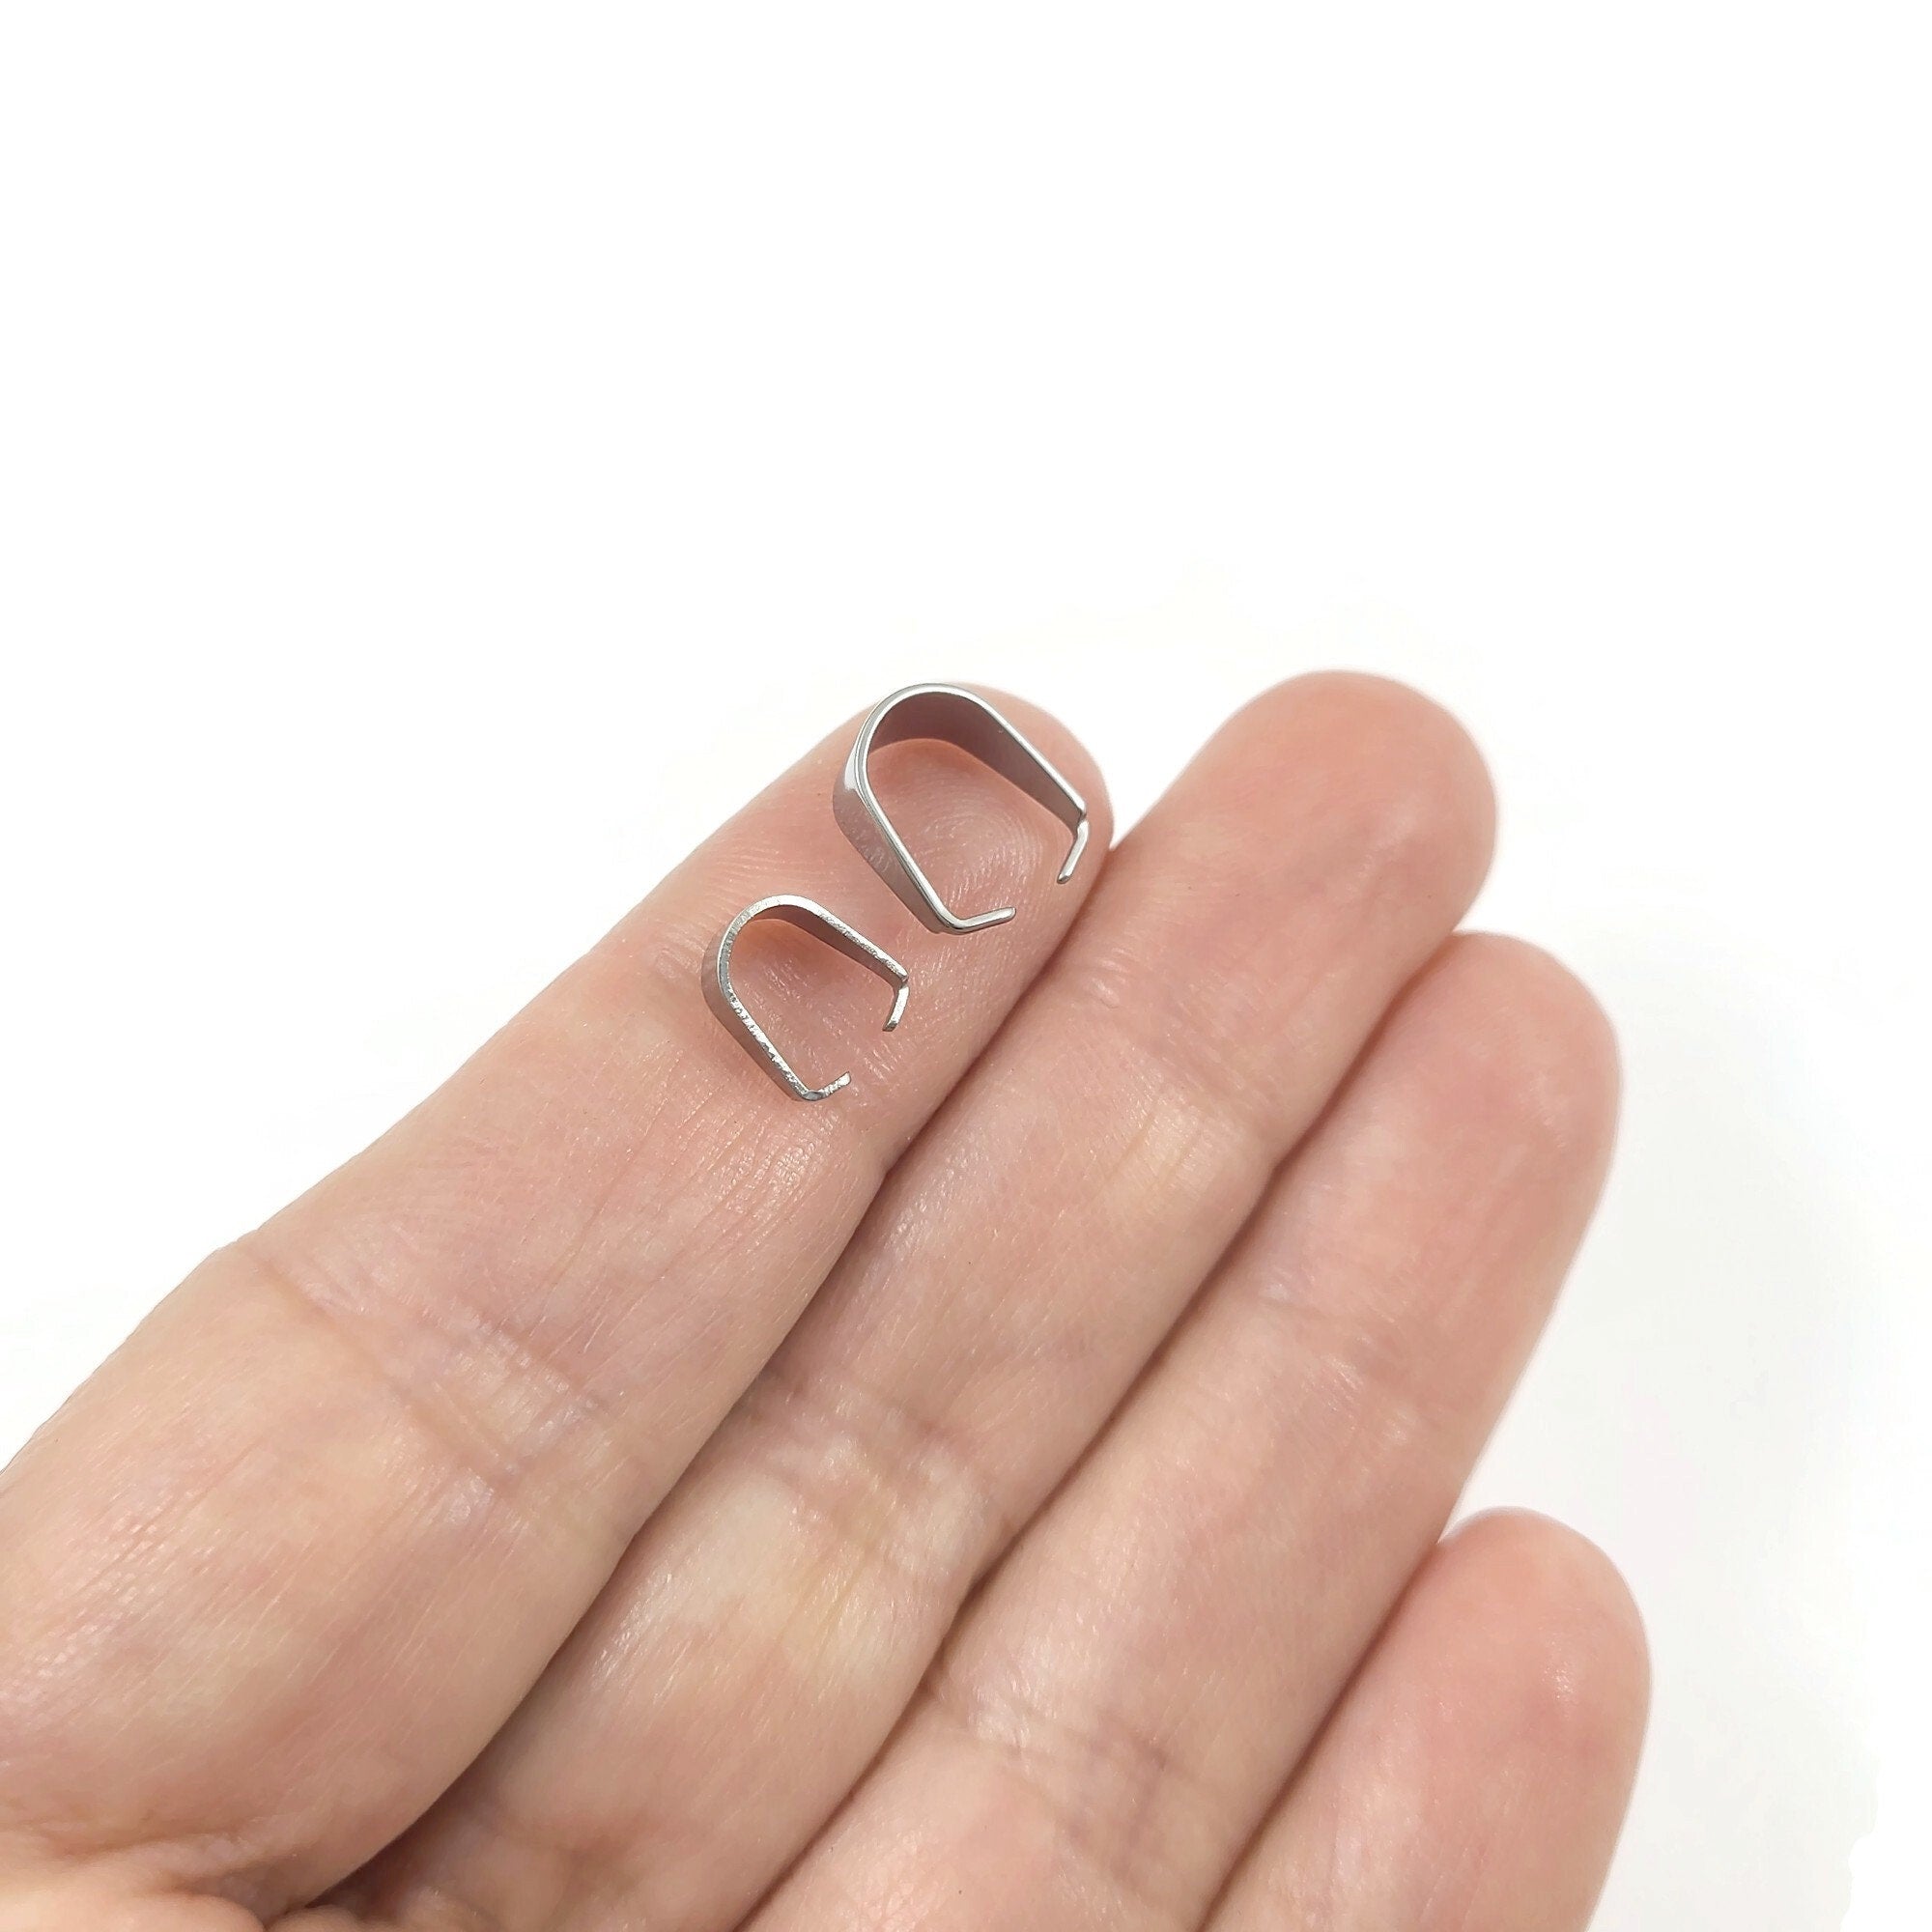 Stainless steel pinch bails, Tarnish free jewelry findings